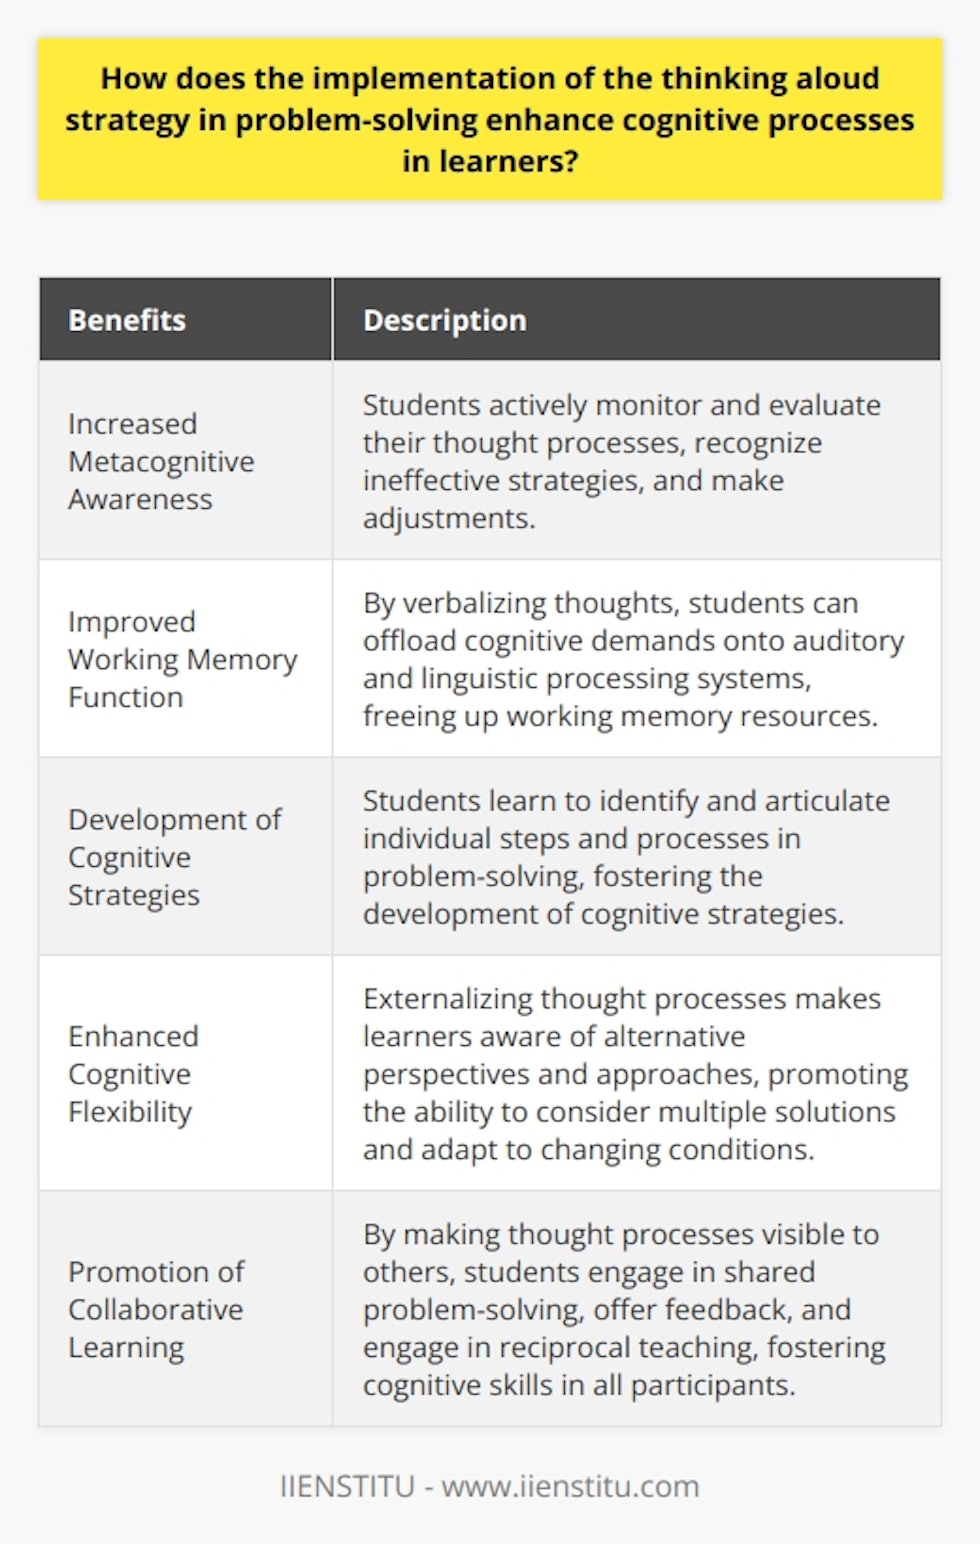 Implementing the thinking aloud strategy in problem-solving tasks can greatly enhance cognitive processes in learners. This technique involves verbalizing one's thoughts as they work through problems, leading to several key benefits.One major advantage of thinking aloud is the increased metacognitive awareness it promotes. Students actively monitor and evaluate their thought processes, enabling them to recognize ineffective strategies and make adjustments. This self-regulation ability helps learners become more efficient problem-solvers in the long run.Another benefit is the improvement in working memory function. By verbalizing their thoughts, students can offload some cognitive demands onto their auditory and linguistic processing systems. This frees up working memory resources, allowing for more effective information processing and integration.Thinking aloud also encourages the development of cognitive strategies. Students learn to identify and articulate individual steps and processes in problem-solving. This structured approach fosters the development of cognitive strategies that can be refined over time, leading to more advanced, higher-order thinking skills.Furthermore, thinking aloud enhances cognitive flexibility. Externalizing their thought process makes learners more aware of alternative perspectives and approaches. This promotes the ability to consider multiple solutions, adapt to changing conditions, and solve problems more effectively.The thinking aloud strategy also promotes collaborative learning. By making their thought process visible to others, students can engage in shared problem-solving, offer constructive feedback, and engage in reciprocal teaching. This fosters the development of cognitive skills for all participants and strengthens overall problem-solving abilities.In conclusion, implementing the thinking aloud strategy in problem-solving tasks can greatly enhance cognitive processes in learners. This technique promotes metacognitive awareness, improves working memory function, facilitates cognitive strategy development, fosters cognitive flexibility, and encourages collaborative learning. By consistently using this strategy, educators can equip students with critical skills necessary for success in various academic and real-world problem-solving situations.